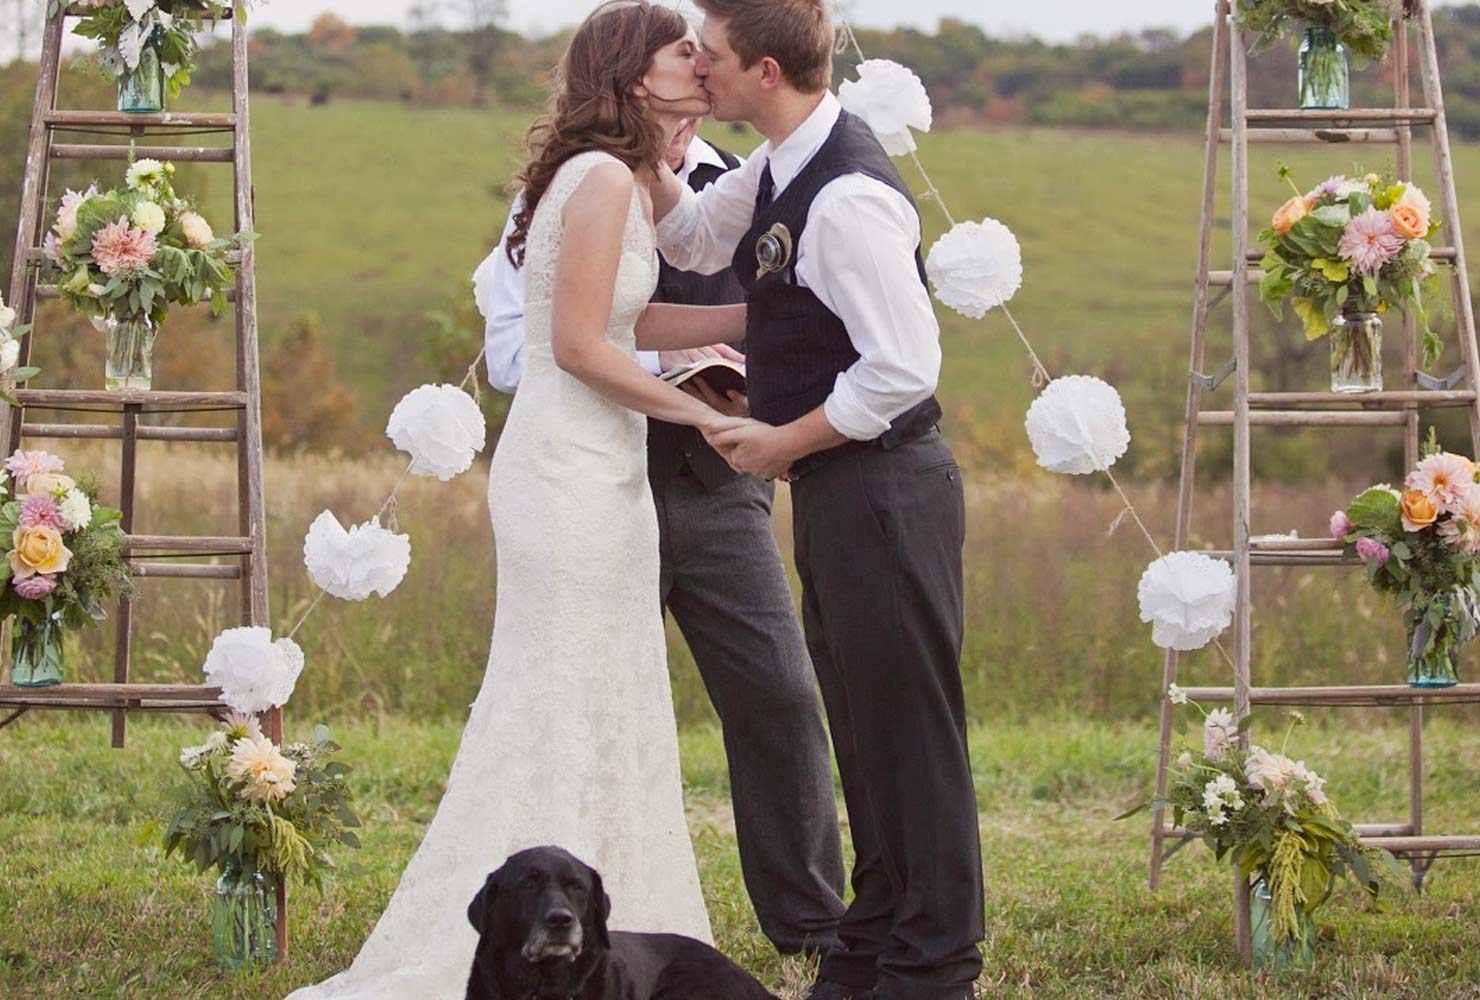 Married couple at altar with black dog.